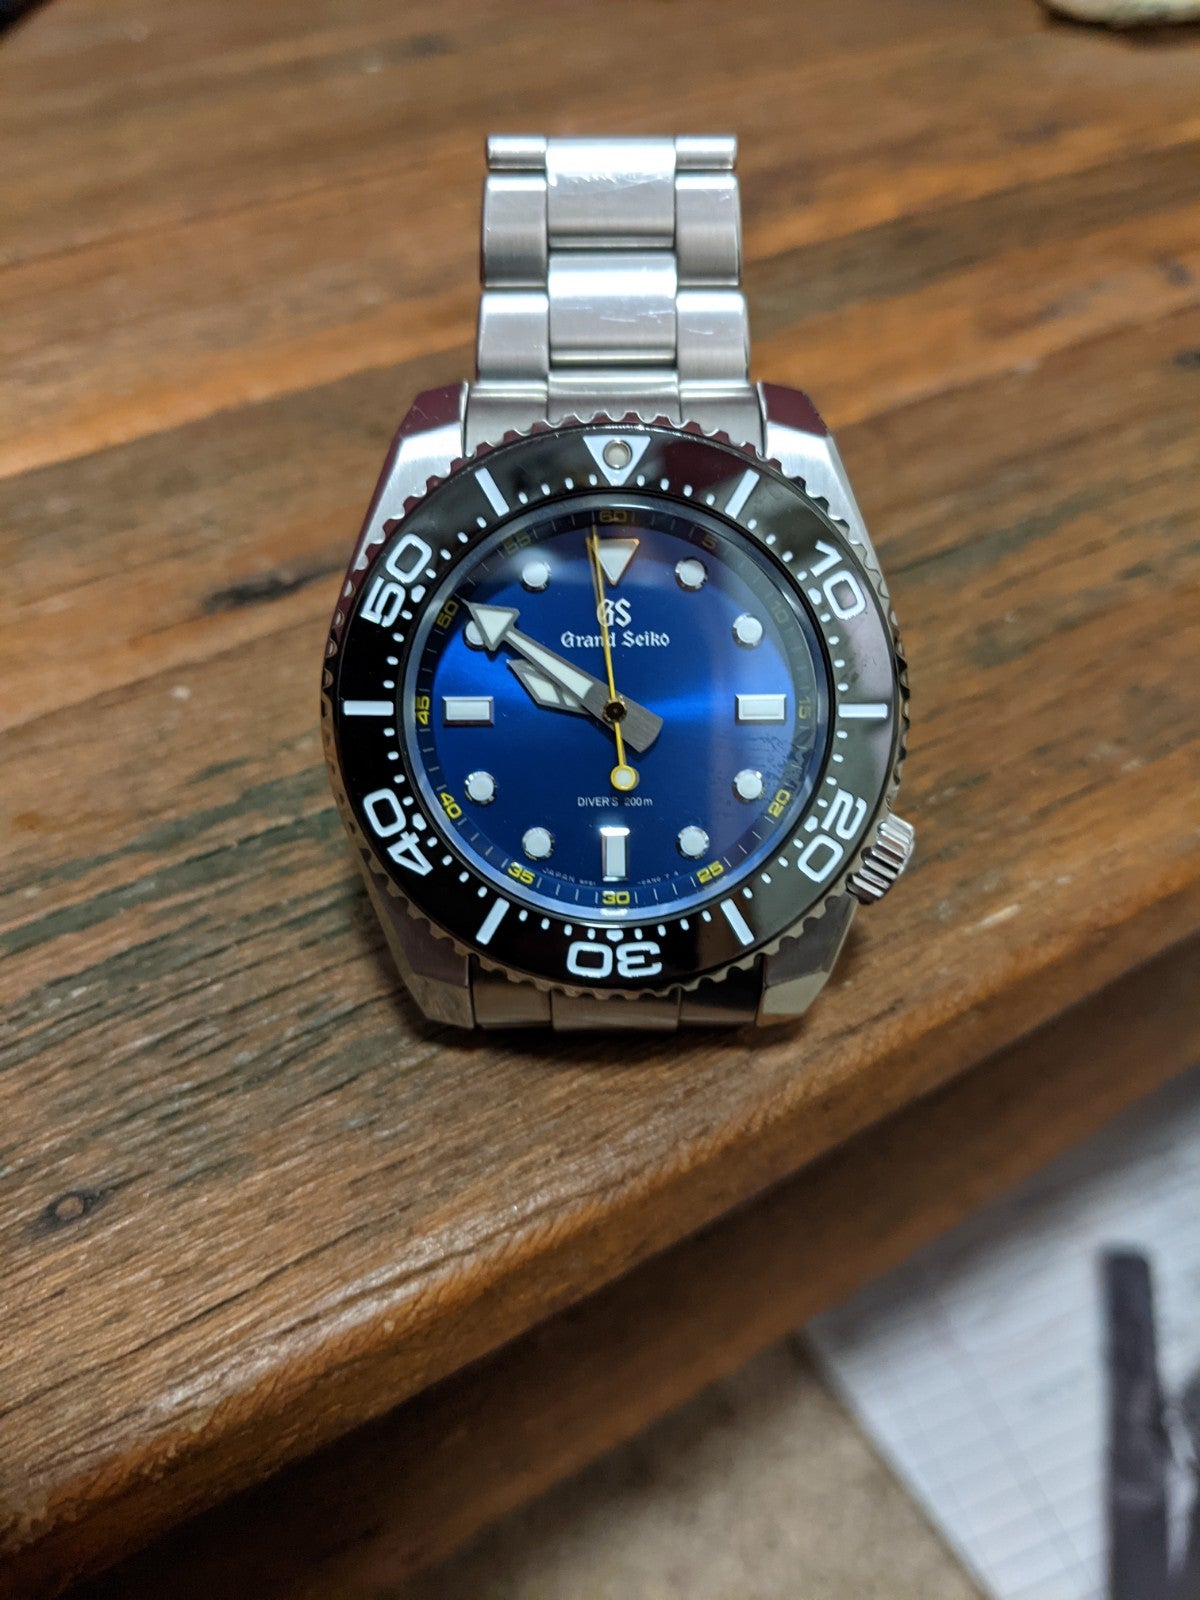 Sold, sold Grand Seiko SBGX337 Blue Dial Diver - $2600 | WatchUSeek Watch  Forums